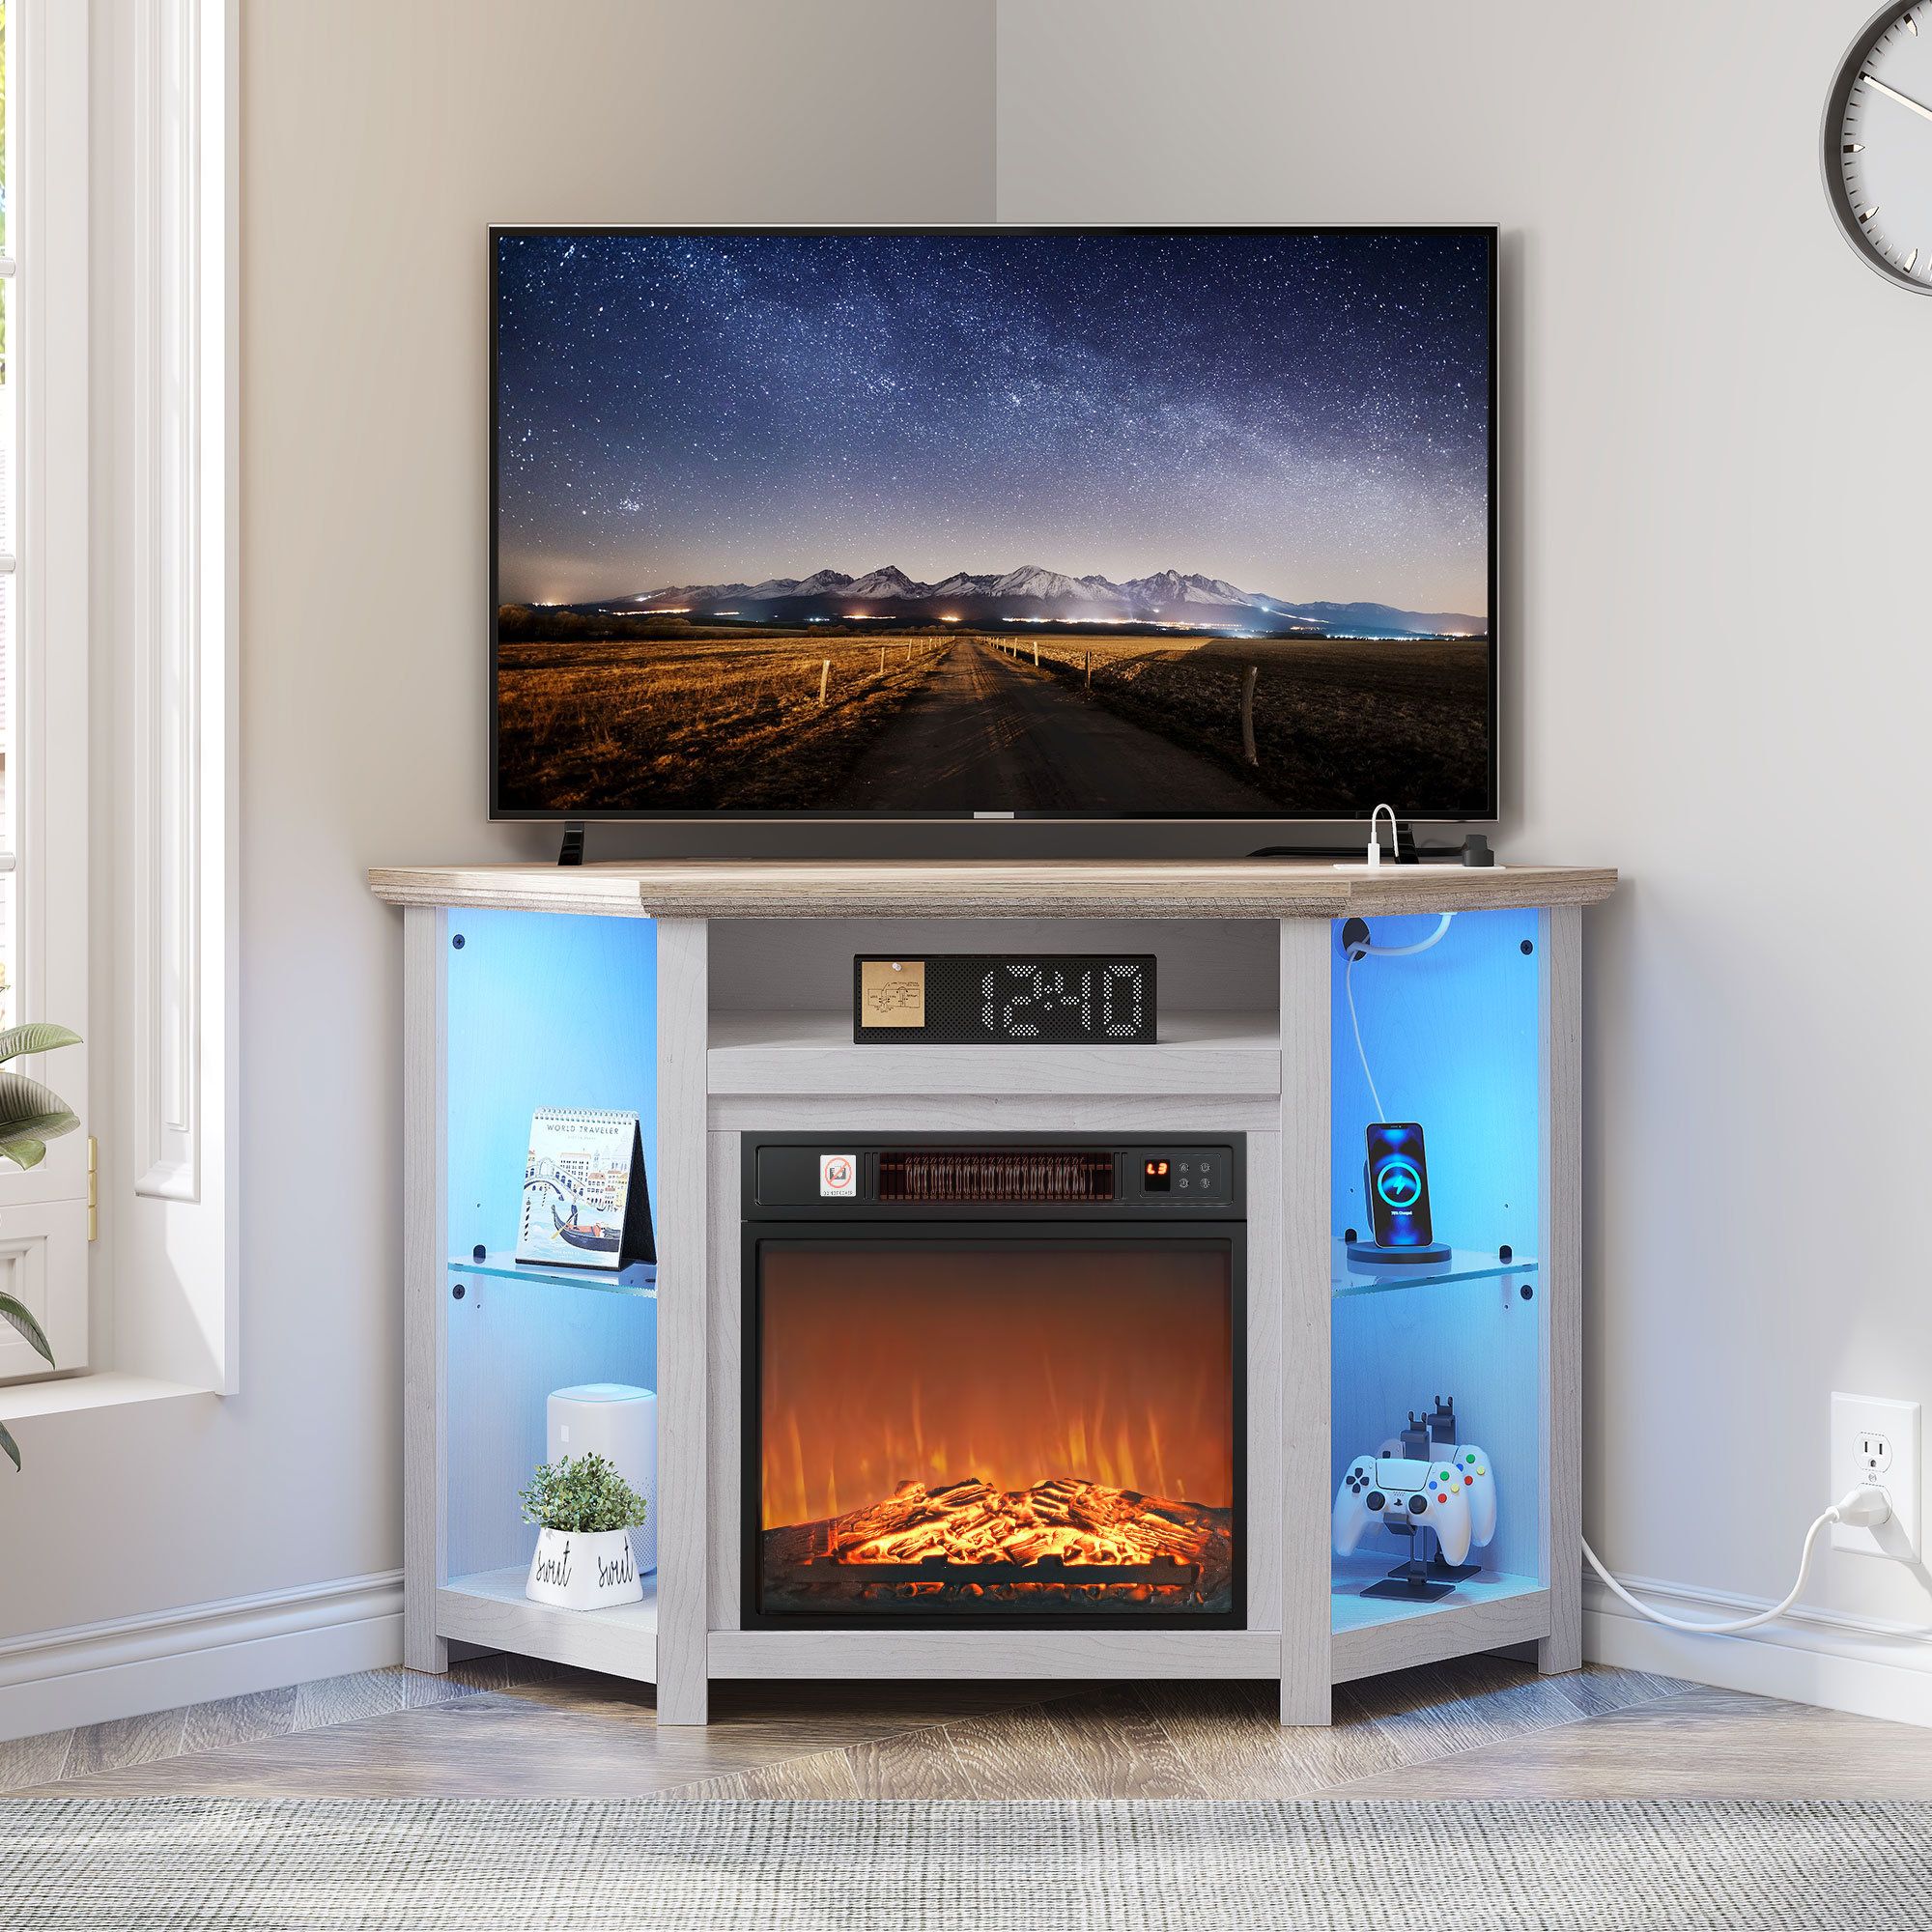 Wrought Studio Gladston Led Corner Tv Stand With Power Outlet For Living  Room With Electric Fireplace Included | Wayfair Inside Led Tv Stands With Outlet (View 11 of 15)